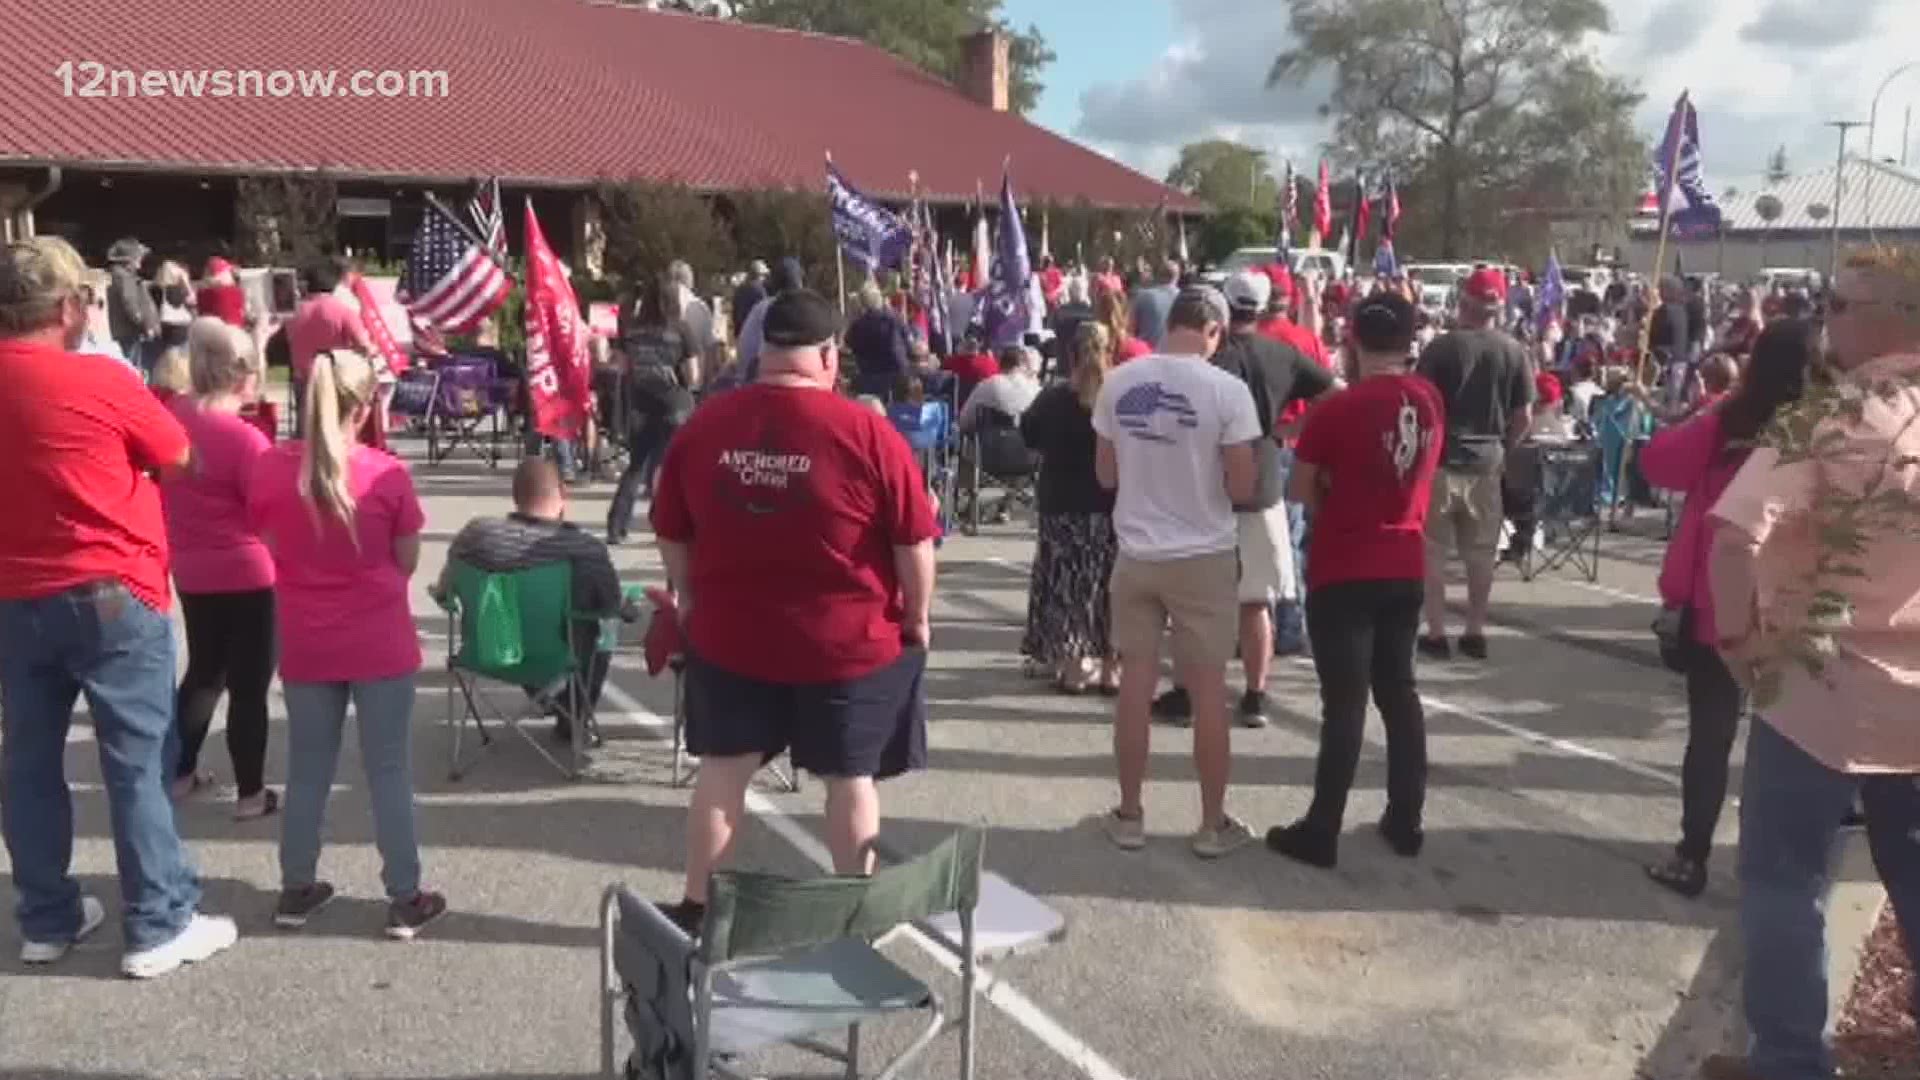 President Trump is not alone in his fight. Hundreds of supporters showed up in Lumberton Sunday for an election integrity rally hosted Congressman Brian Babin.